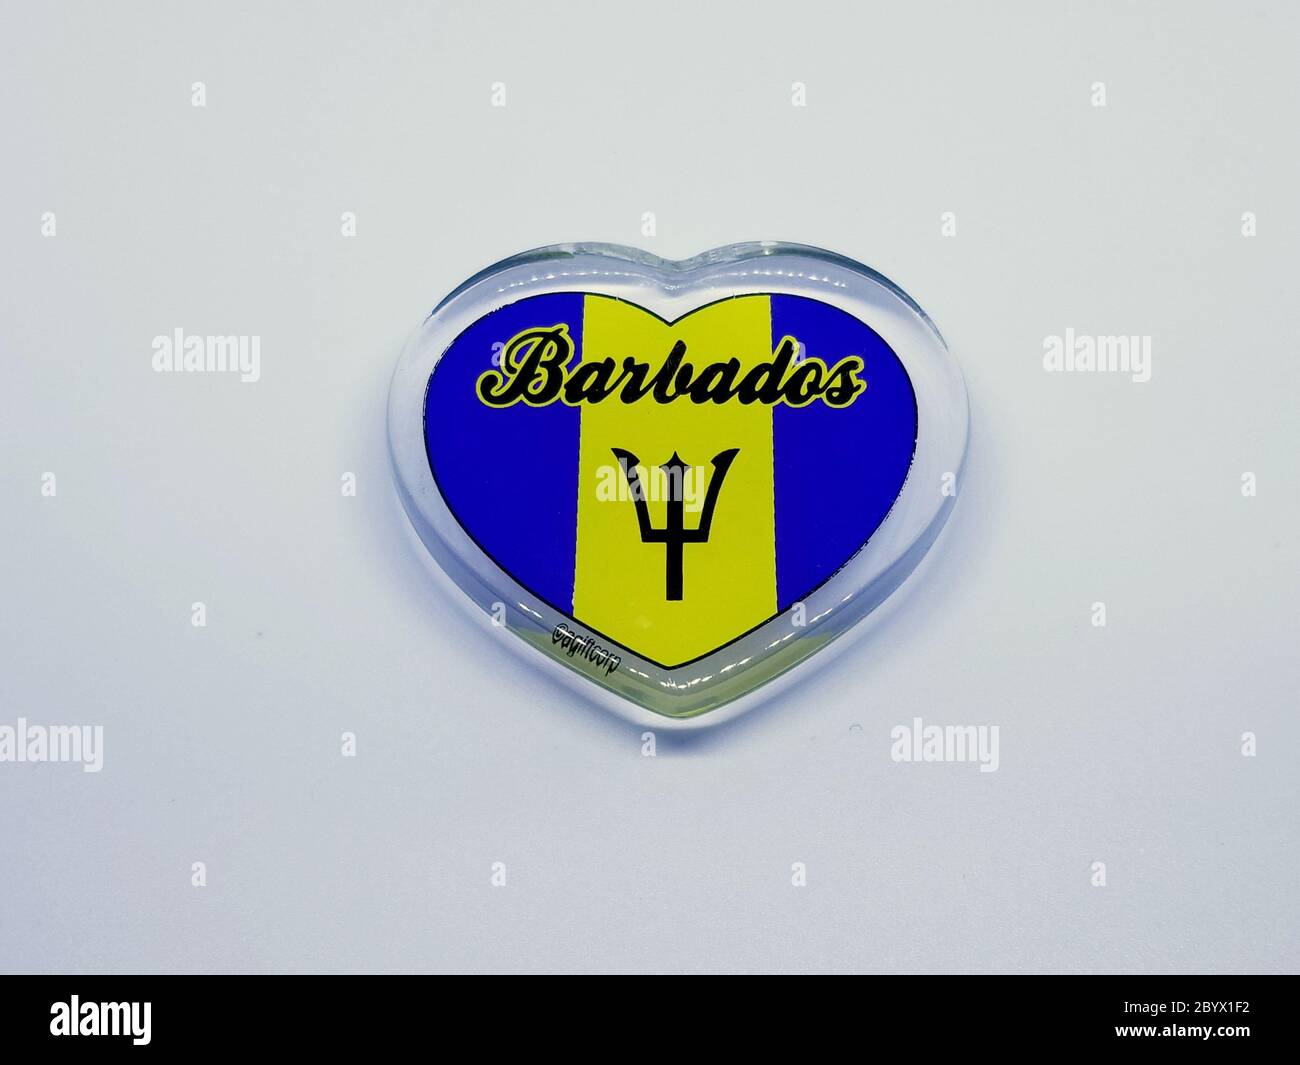 Delaware, U.S.A - November 11, 2019 - Barbados souvenir magnet on a white isolated background Stock Photo